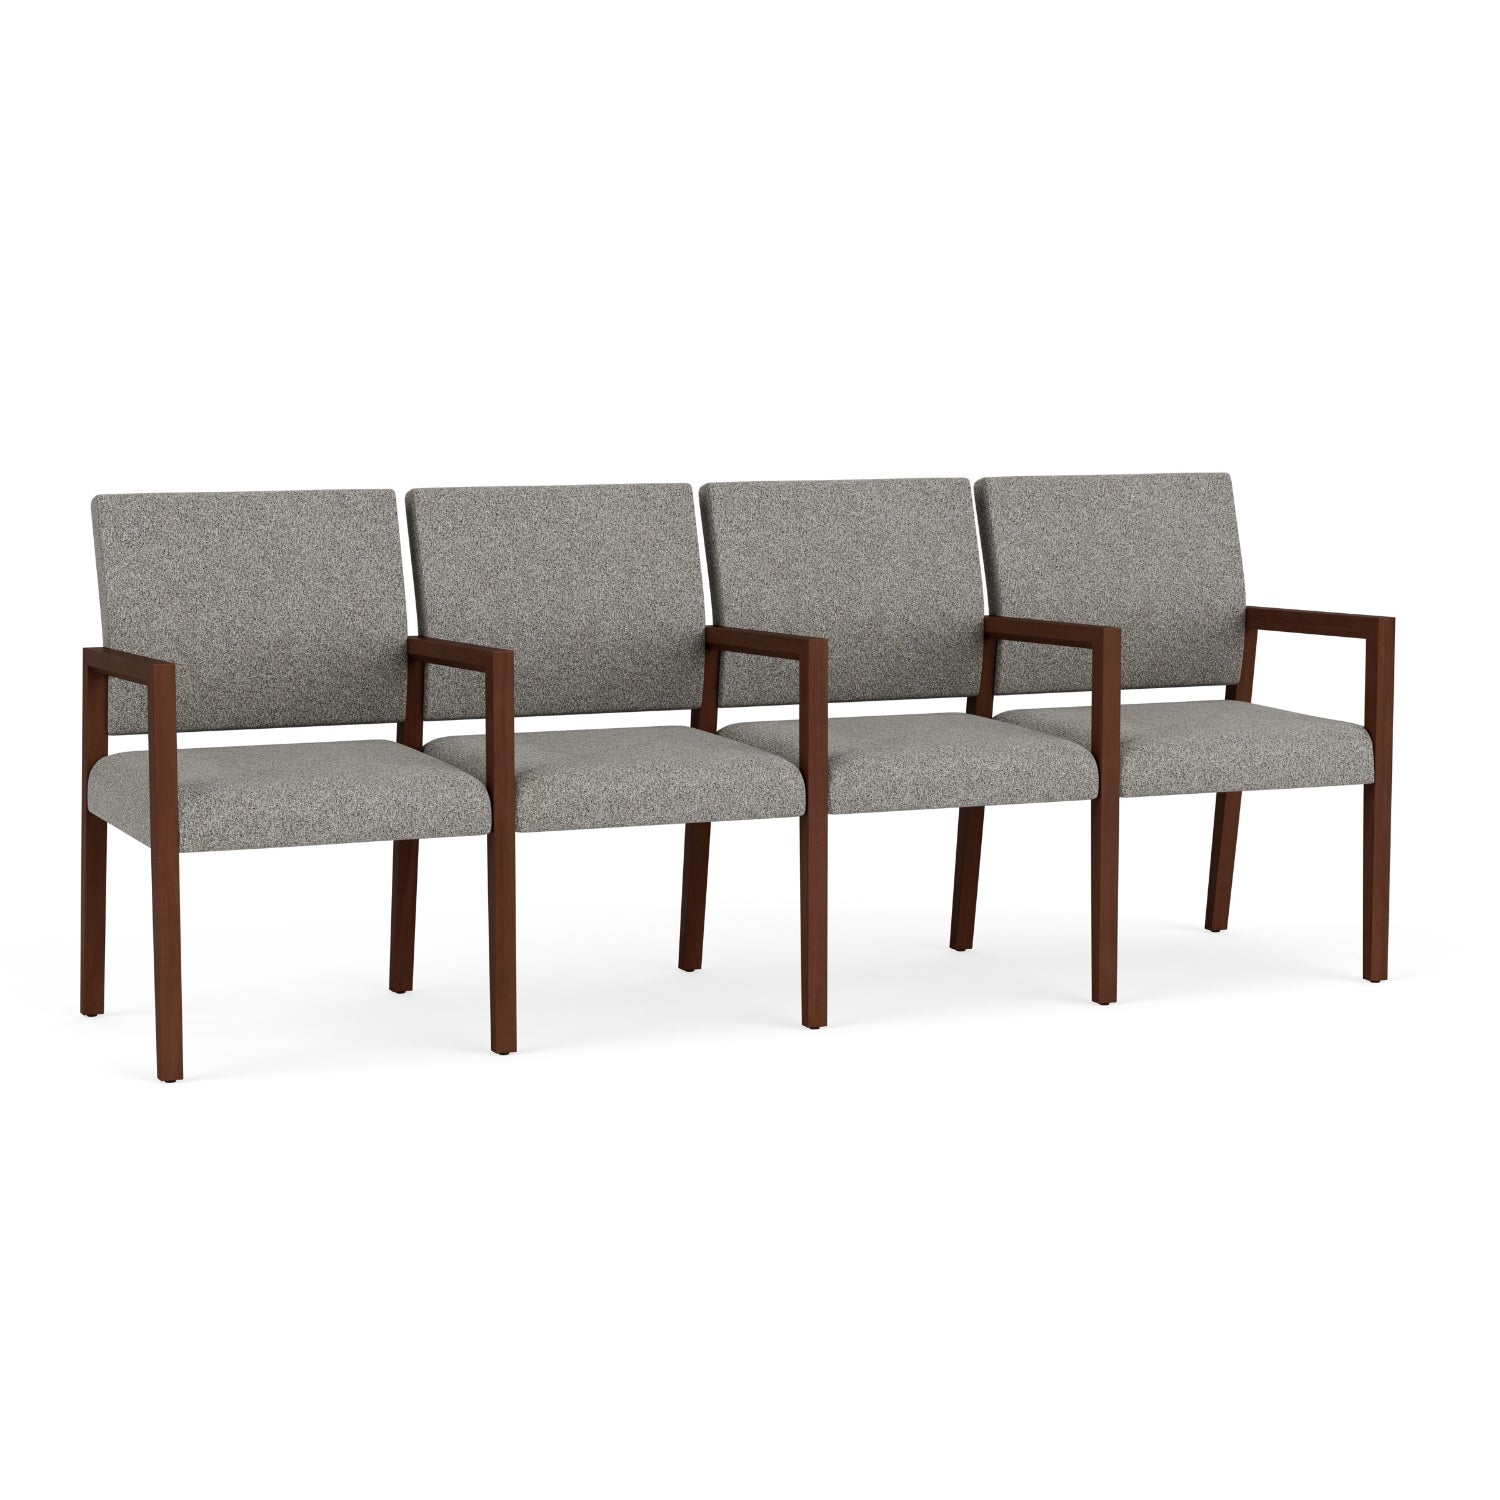 Brooklyn Collection Reception Seating, 4 Seats with Center Arms, Standard Fabric Upholstery, FREE SHIPPING